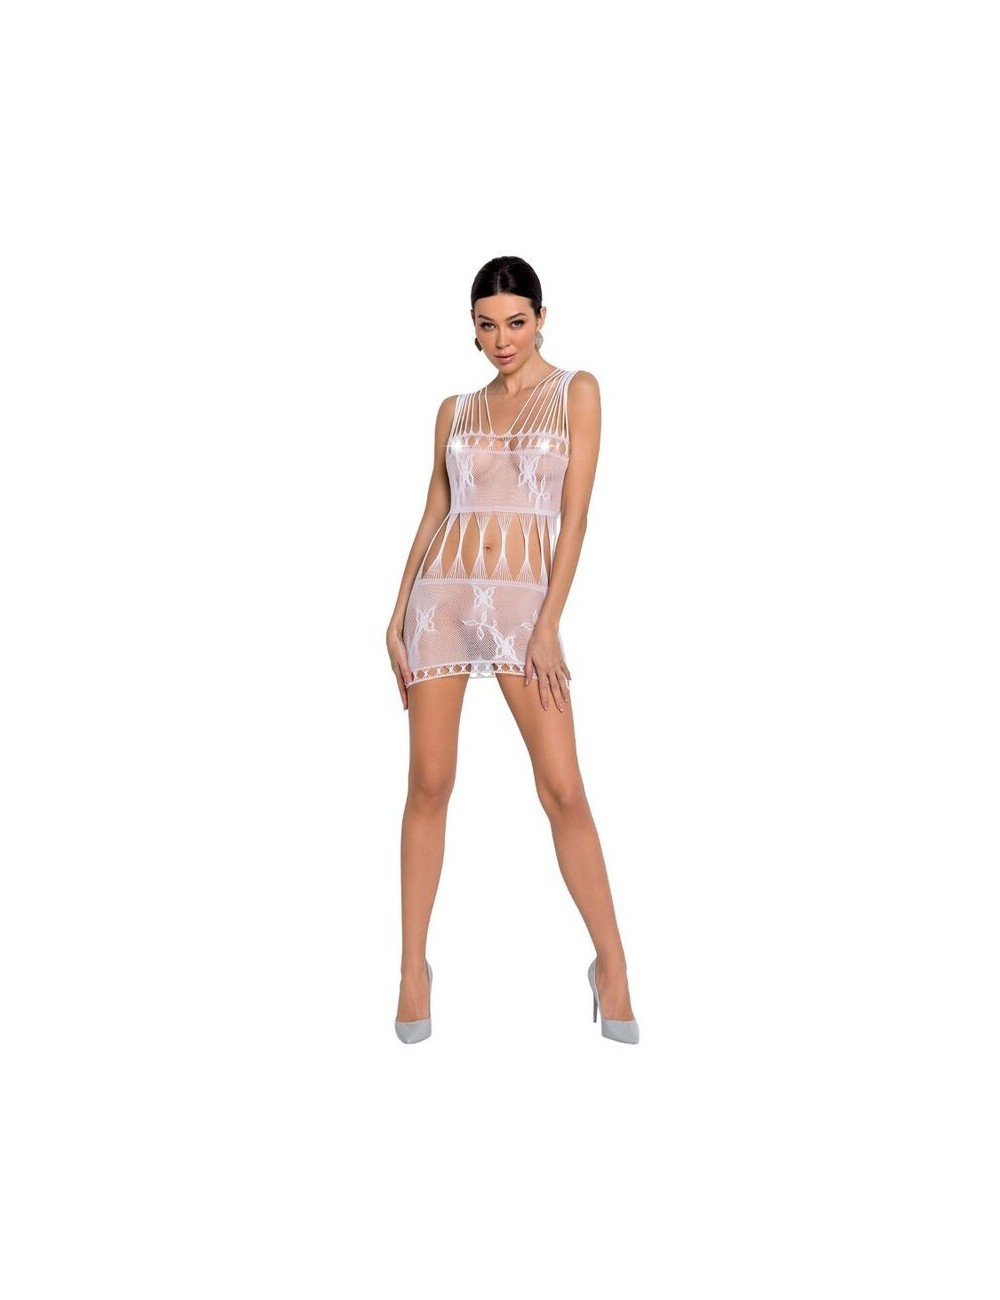 Lingerie - Robes et jupes sexy - Bodystocking passion woman bs090 - blanc taille unique - Passion Woman Bodystockings